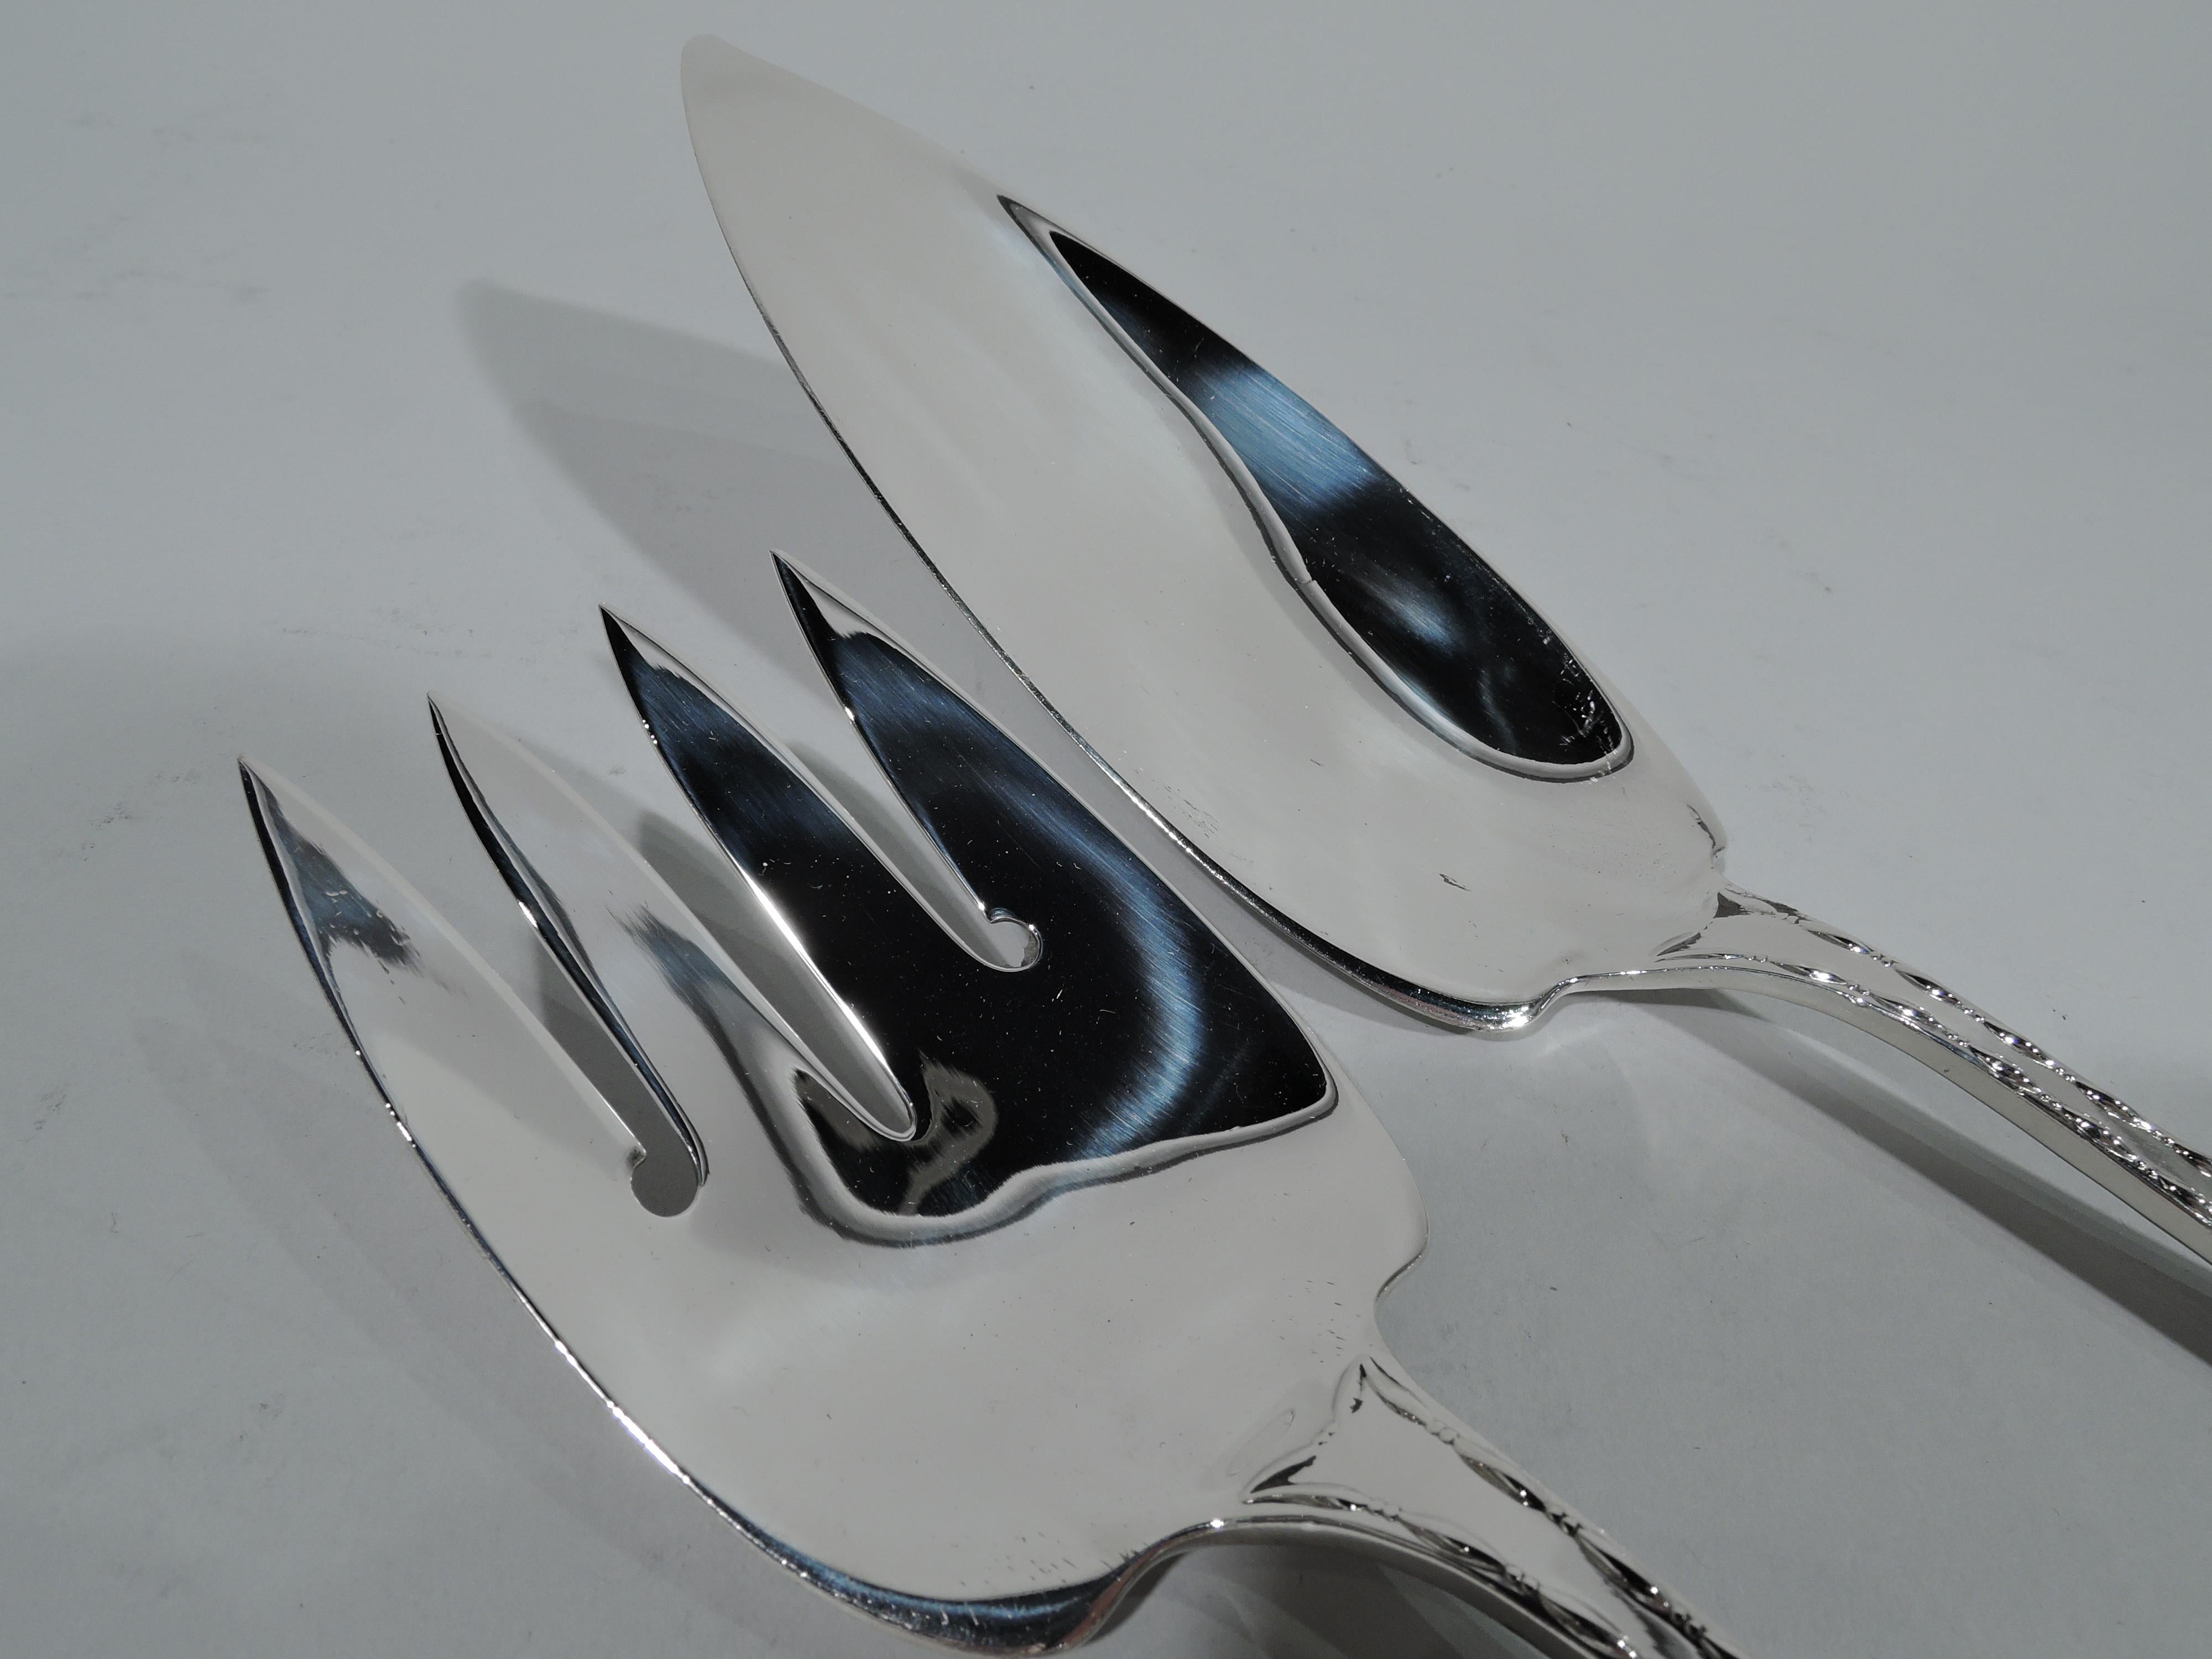 Classical sterling silver fish slice and fork in Marquise pattern. Made by Tiffany & Co. in New York. Beautiful serving pieces with raised bead-and-reel borders. Fork has 4 wide tines and slice has narrow and tapering blade. This pattern first